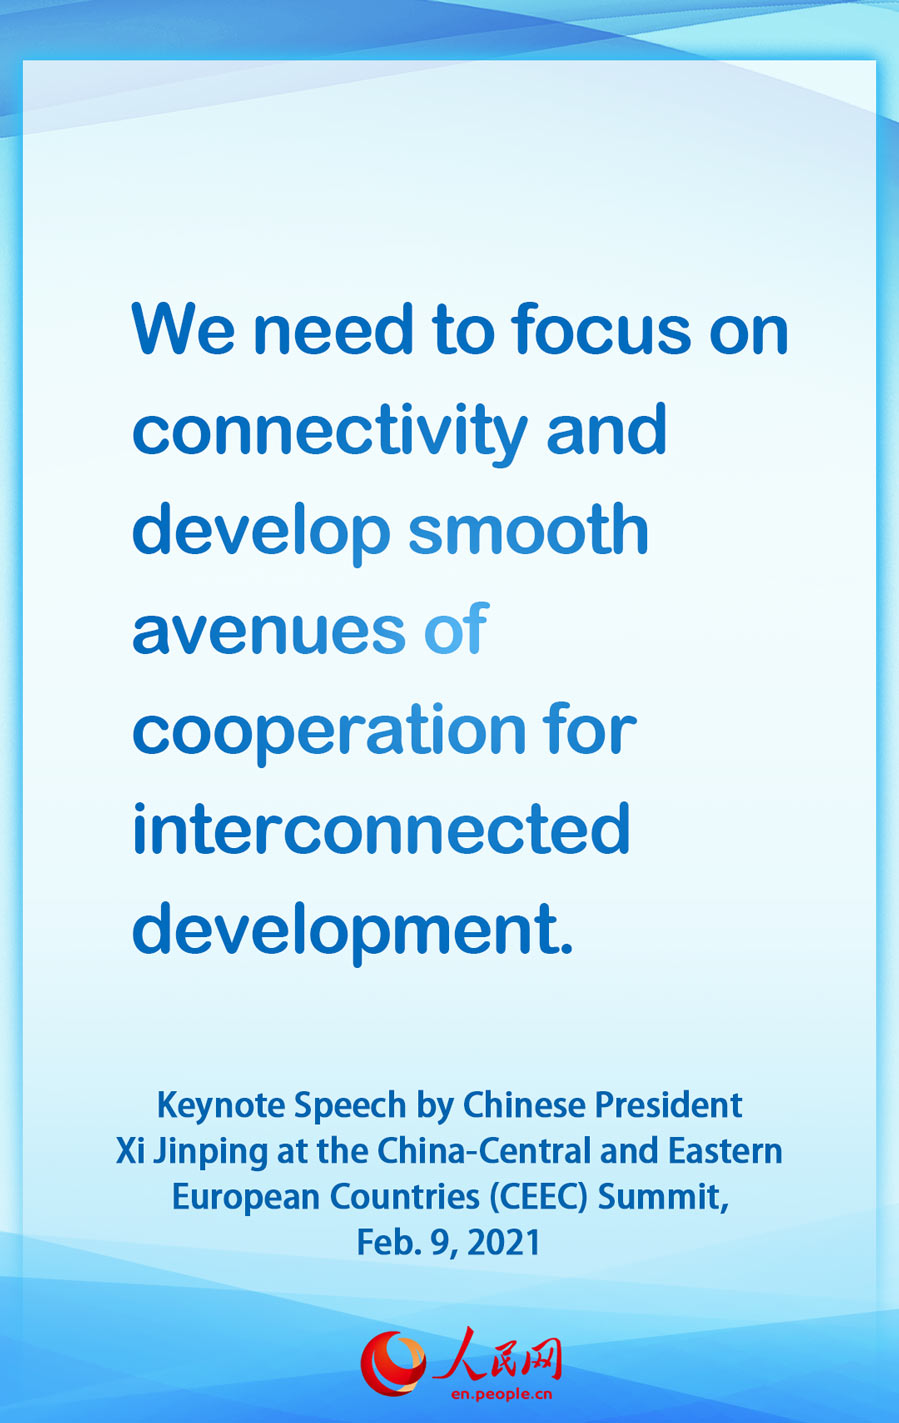 Highlights of the keynote speech by Chinese President Xi Jinping at the China-CEEC Summit